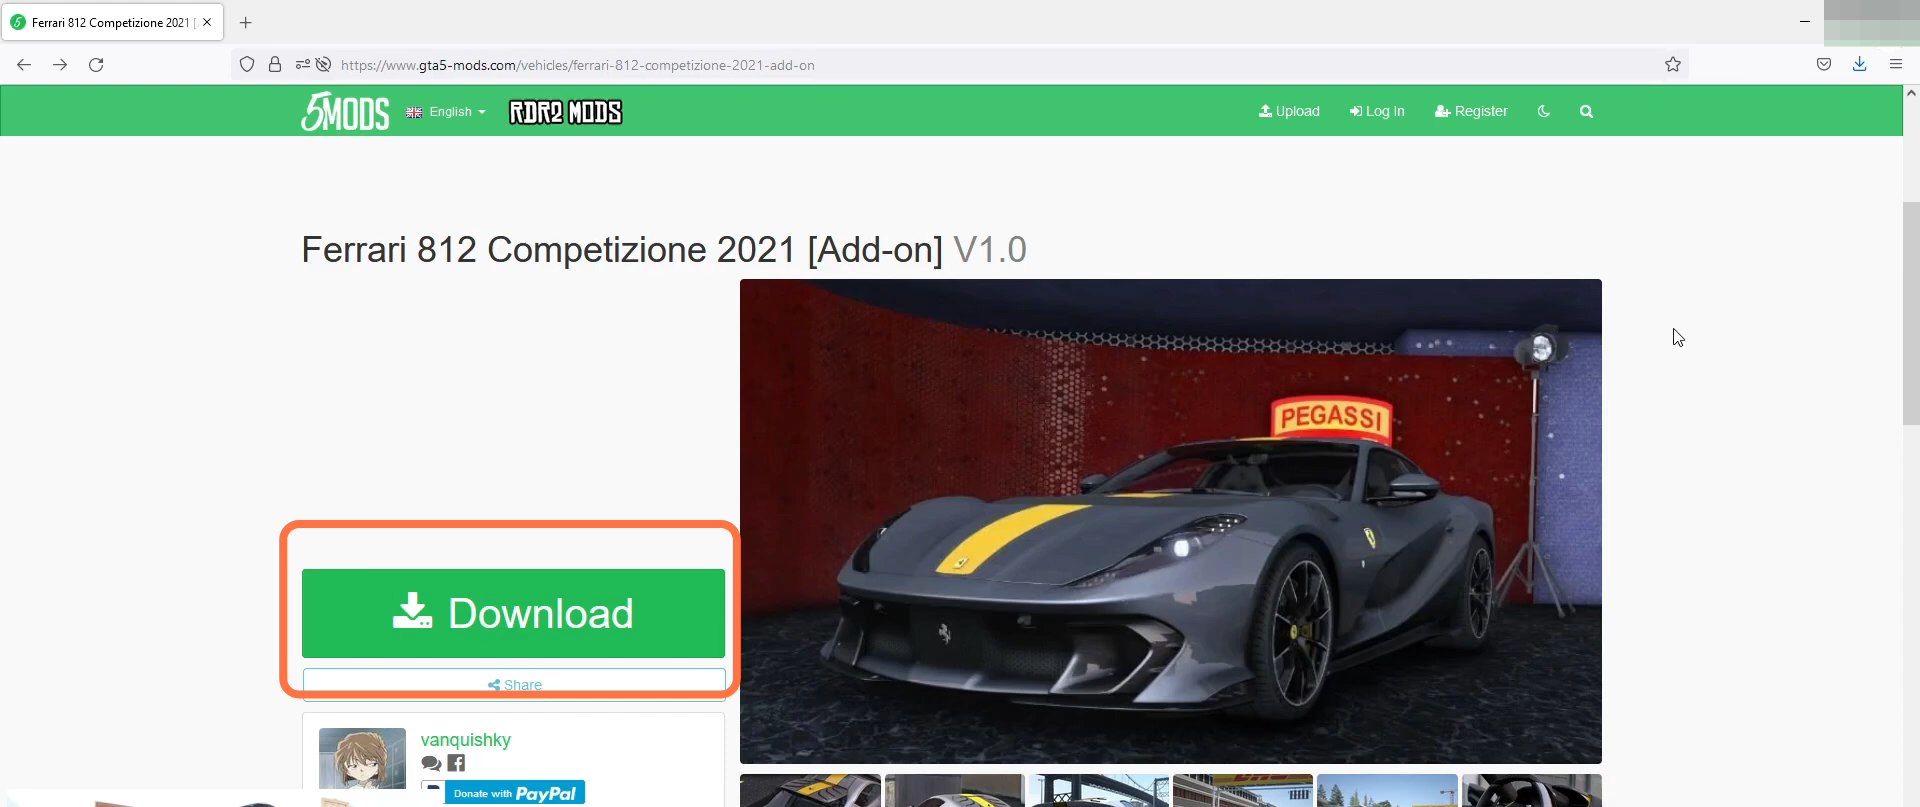 First, you will need to download the mod file from "https://www.gta5-mods.com/vehicles/fe...". Open the link and click on the Download button to download the mod file.